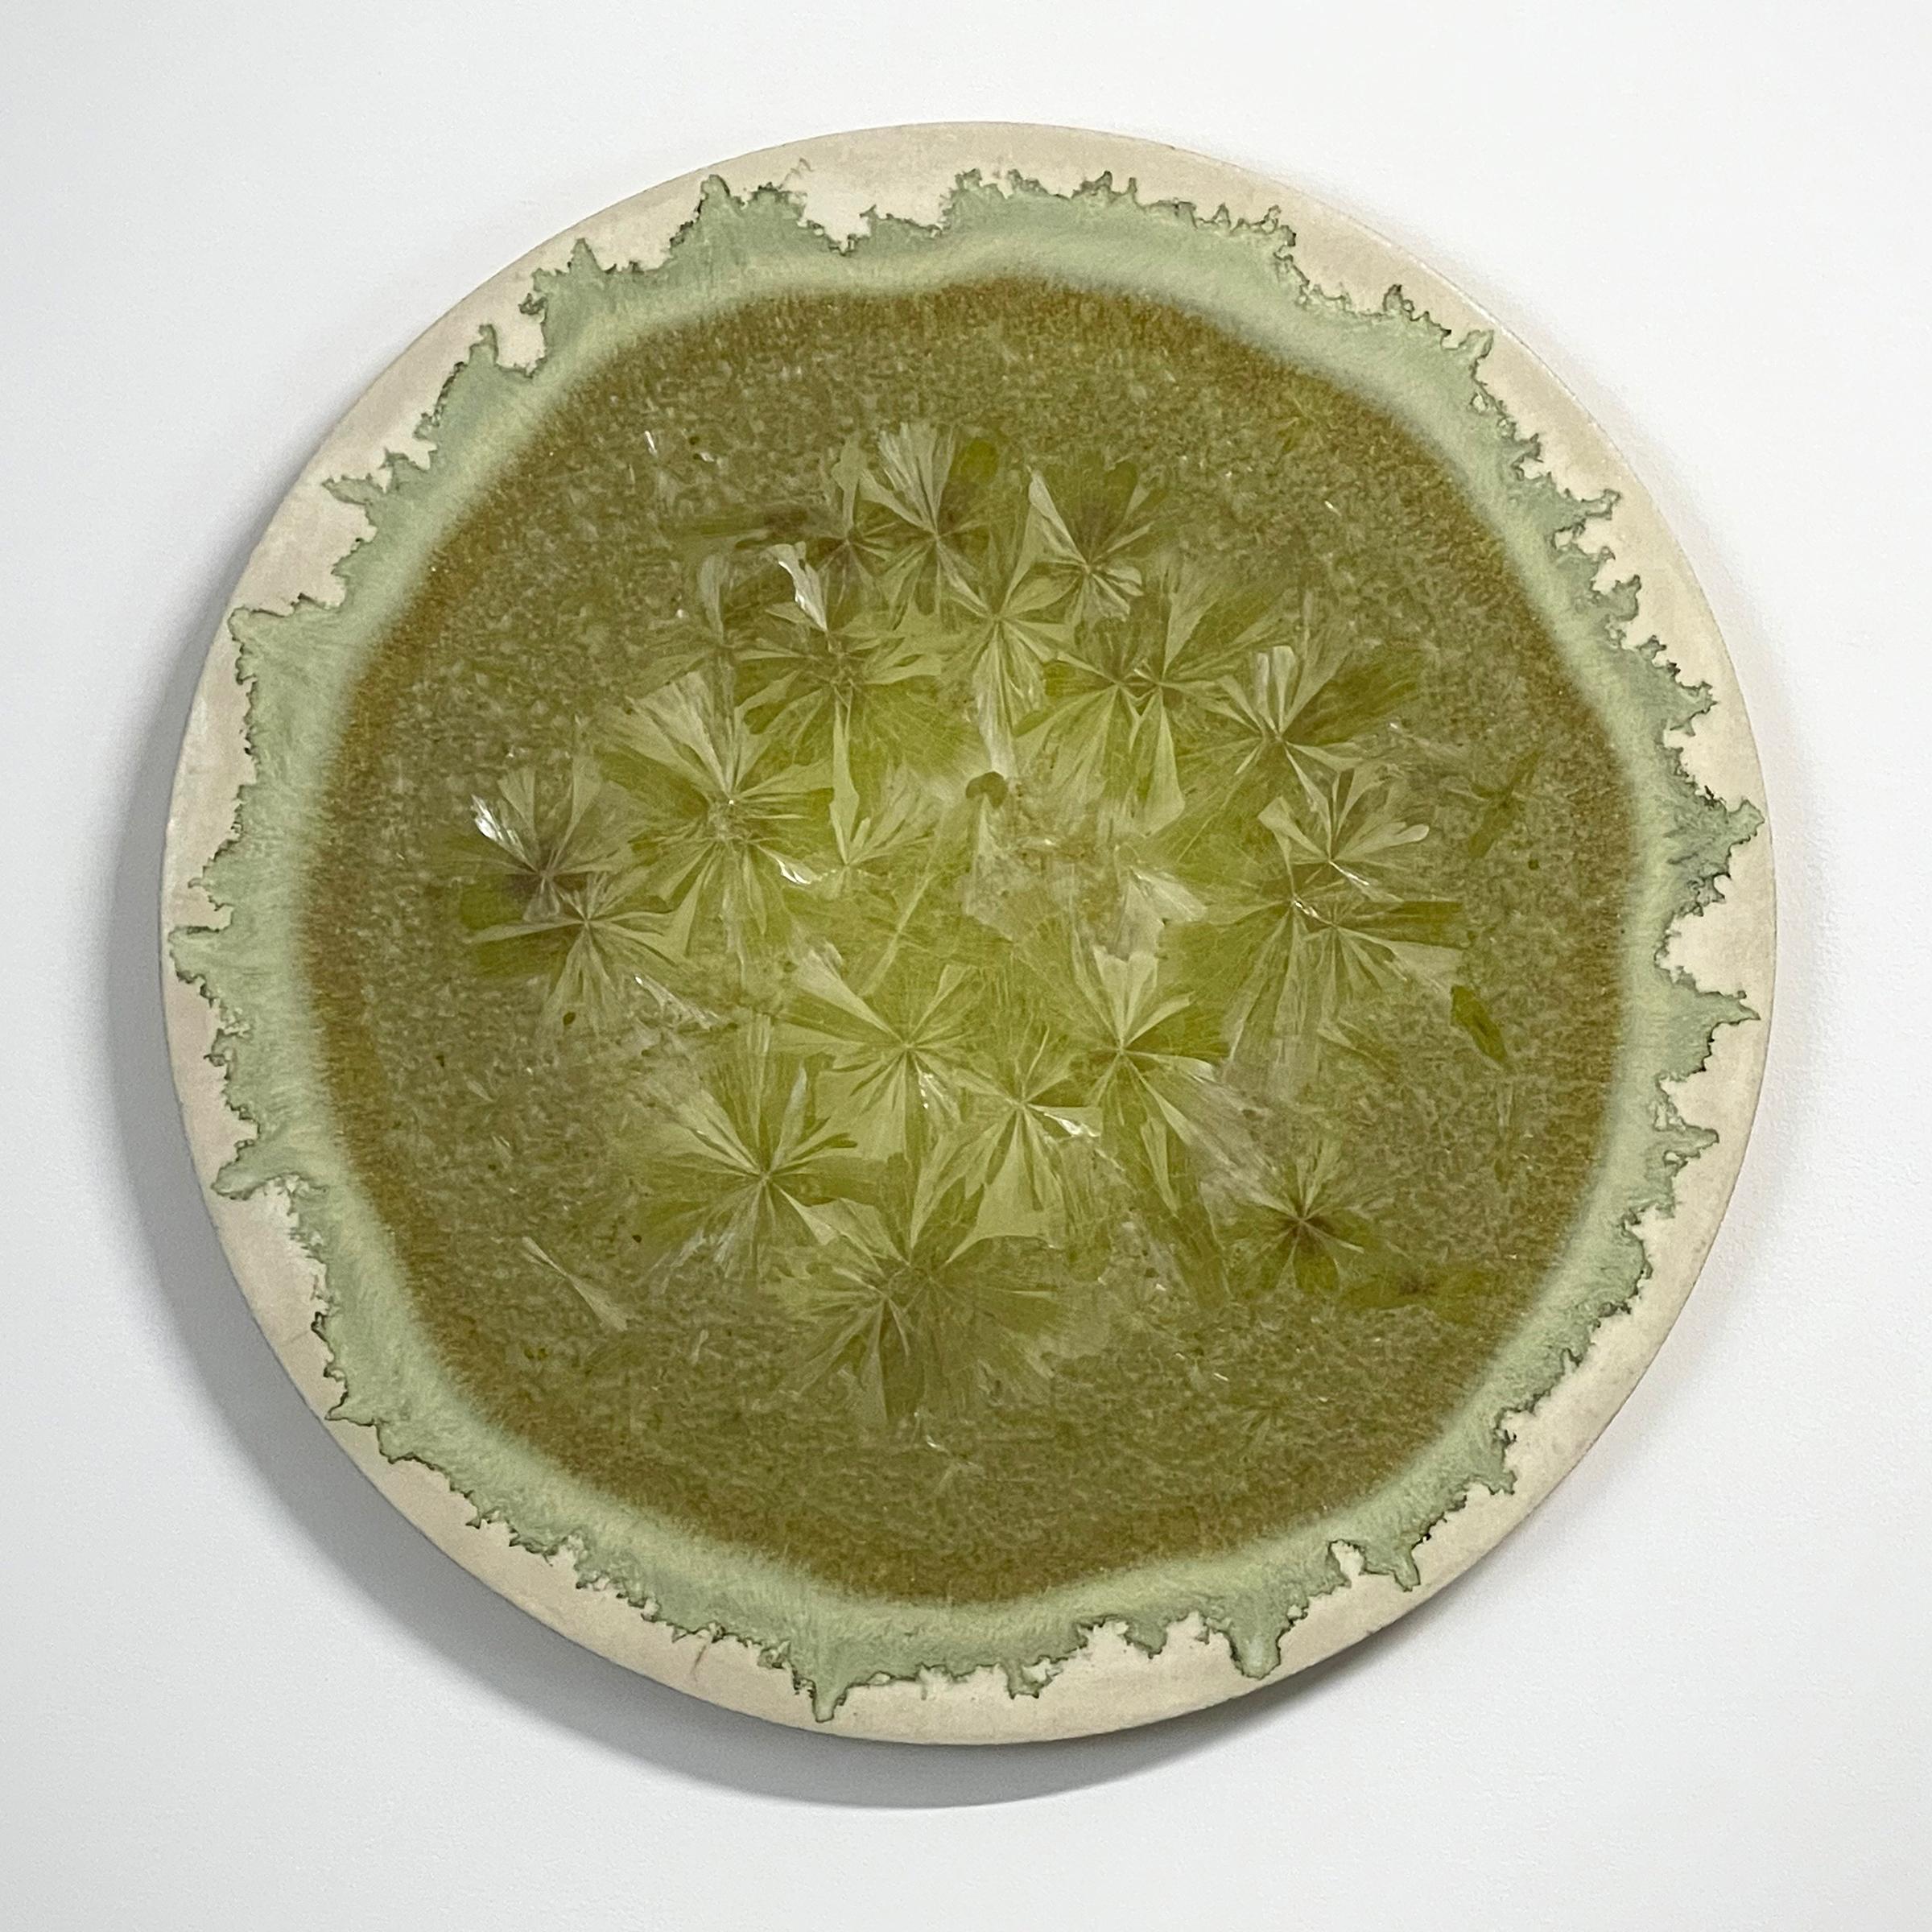 Lithium Crystal Bloom
Ceramic glaze painting by William Edwards
Hand rolled earthenware circular slab with crystalline glaze. 

William received his BFA in sculpture from the historic San Francisco Art Institute and his MFA from UC Davis. William